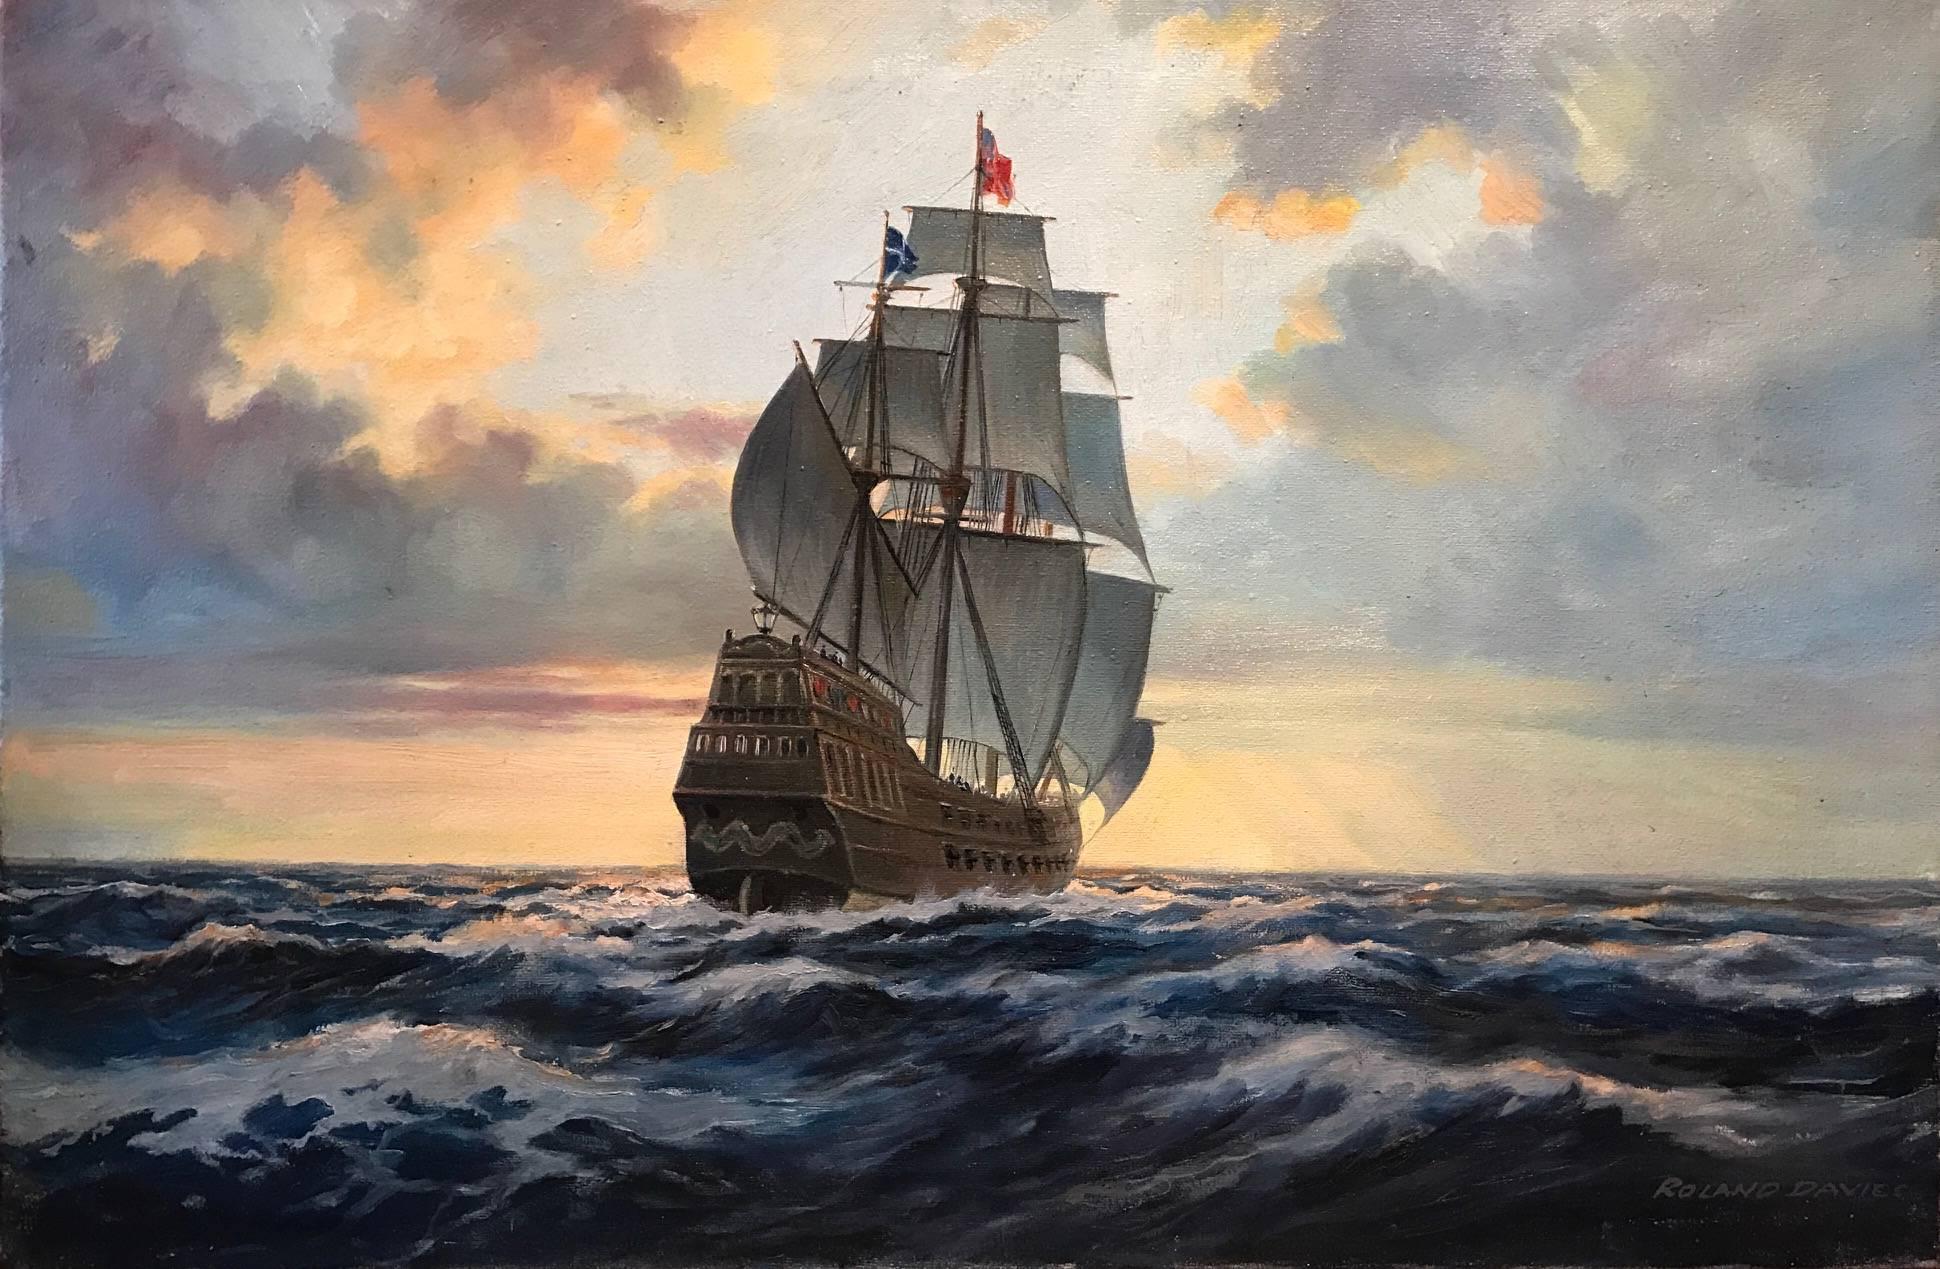 Roland Davies Landscape Painting - Into the Golden West - Large Oil Painting Spanish Galleon at Sea